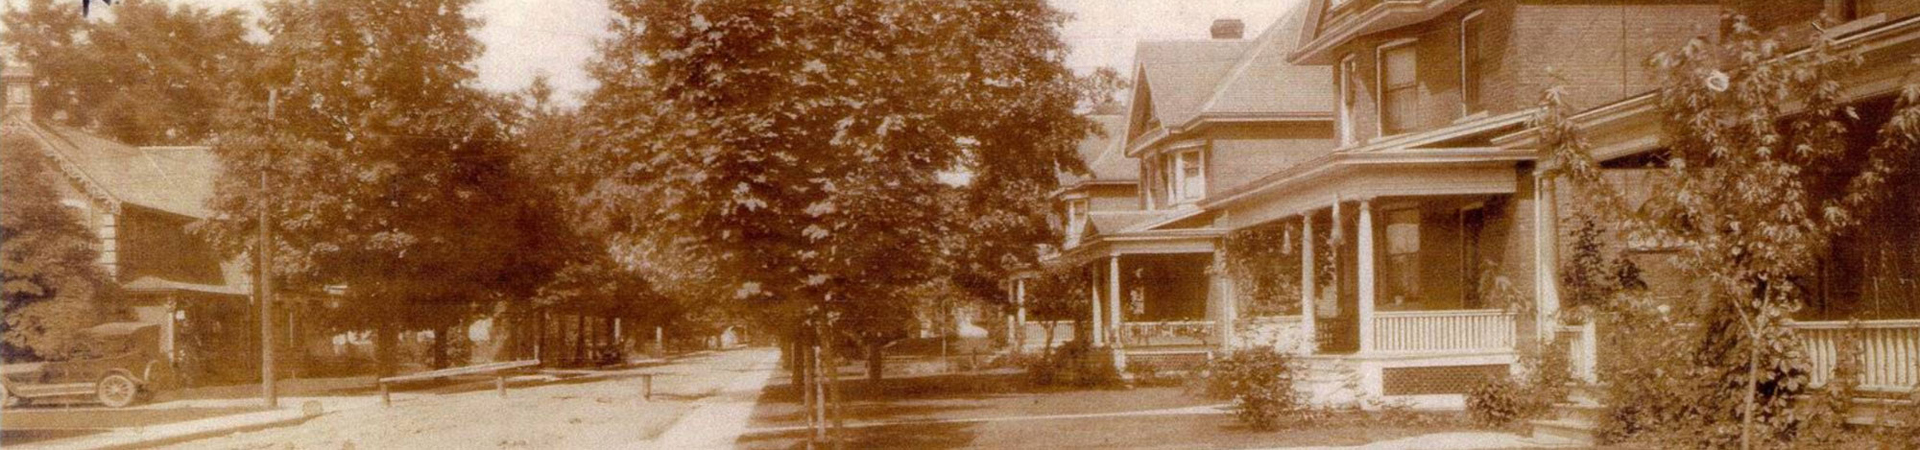 sepia-toned old photo of a residential street in the early 1900s.